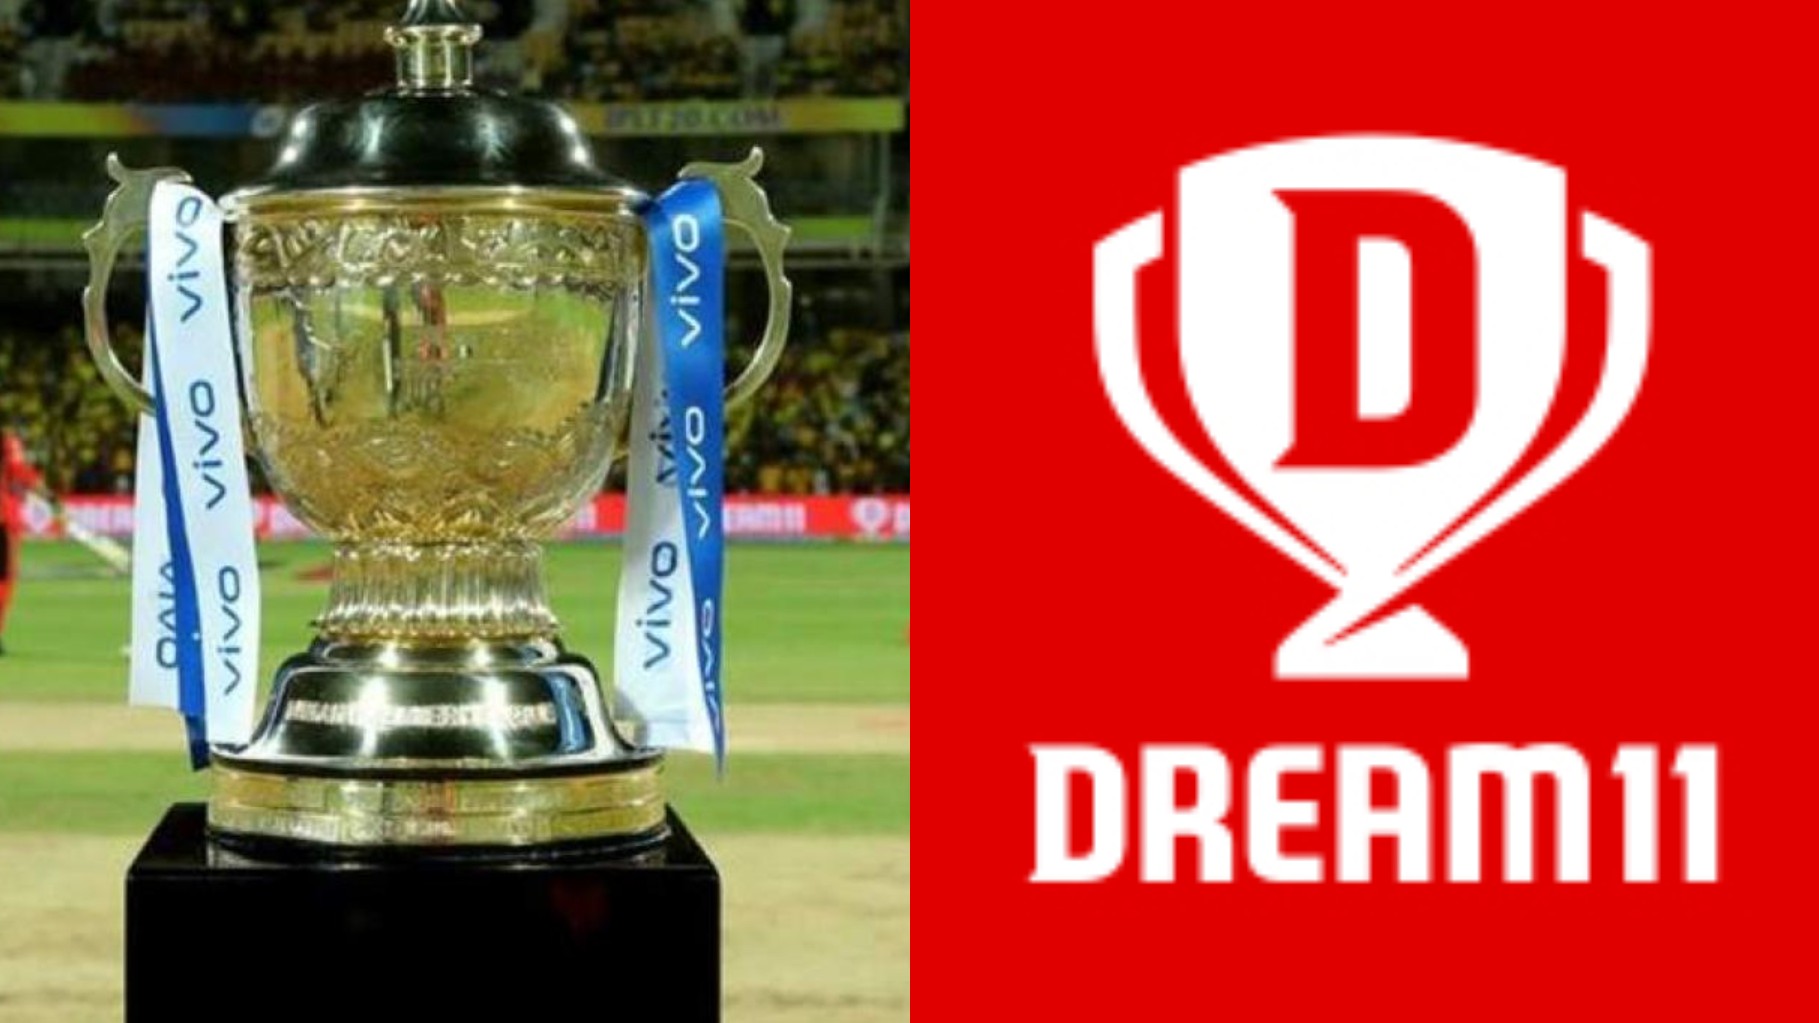 IPL 2020: BCCI announces Dream11 as the title sponsors for IPL 13 only